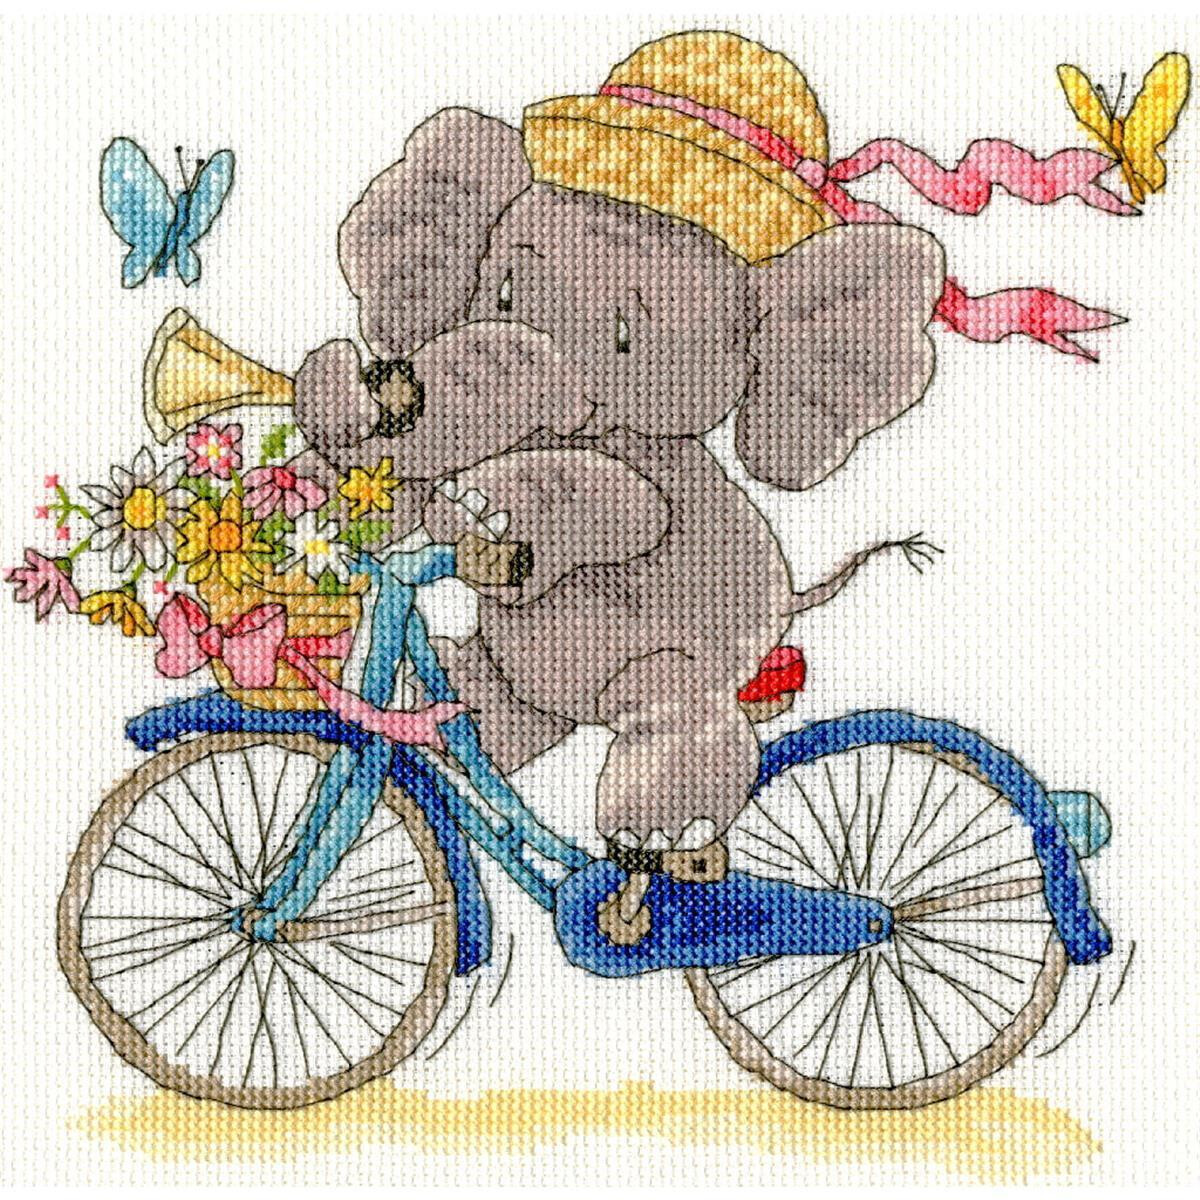 An illustration of a cheerful gray elephant riding a blue...